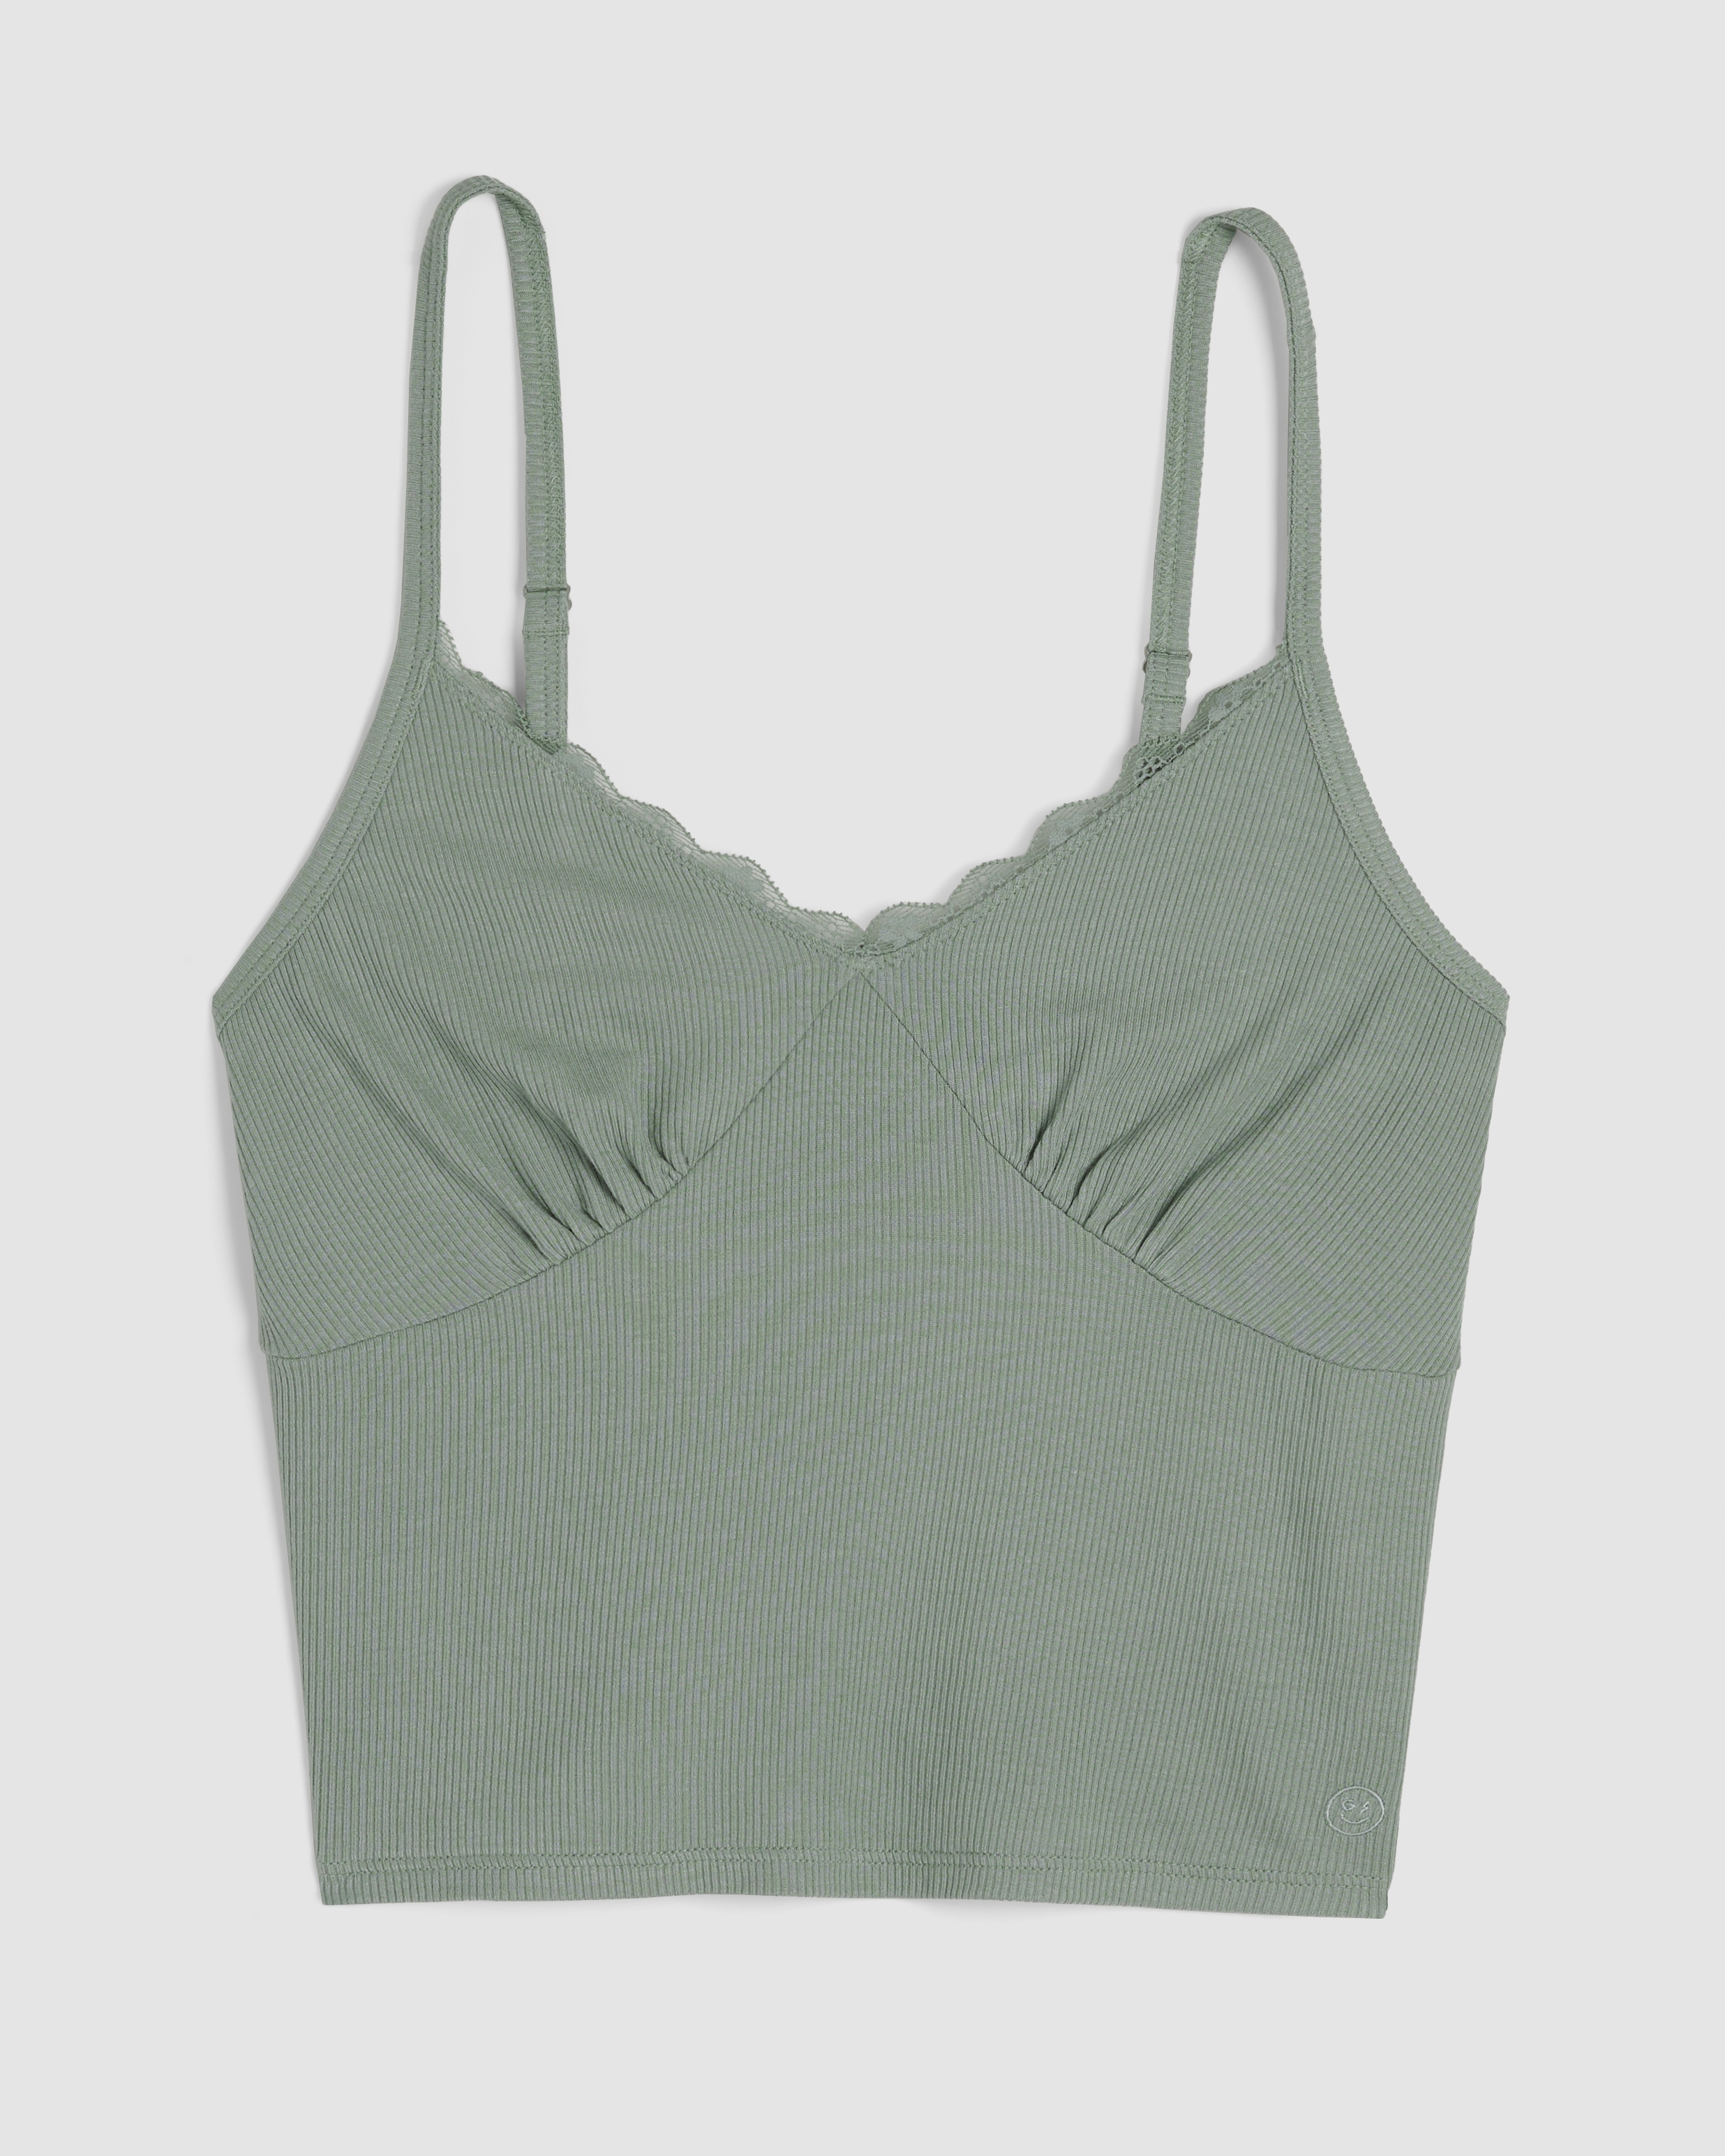 Hollister Gilly Hicks Jersey Ribbed Lace Trim Sleep Tank | Hamilton Place